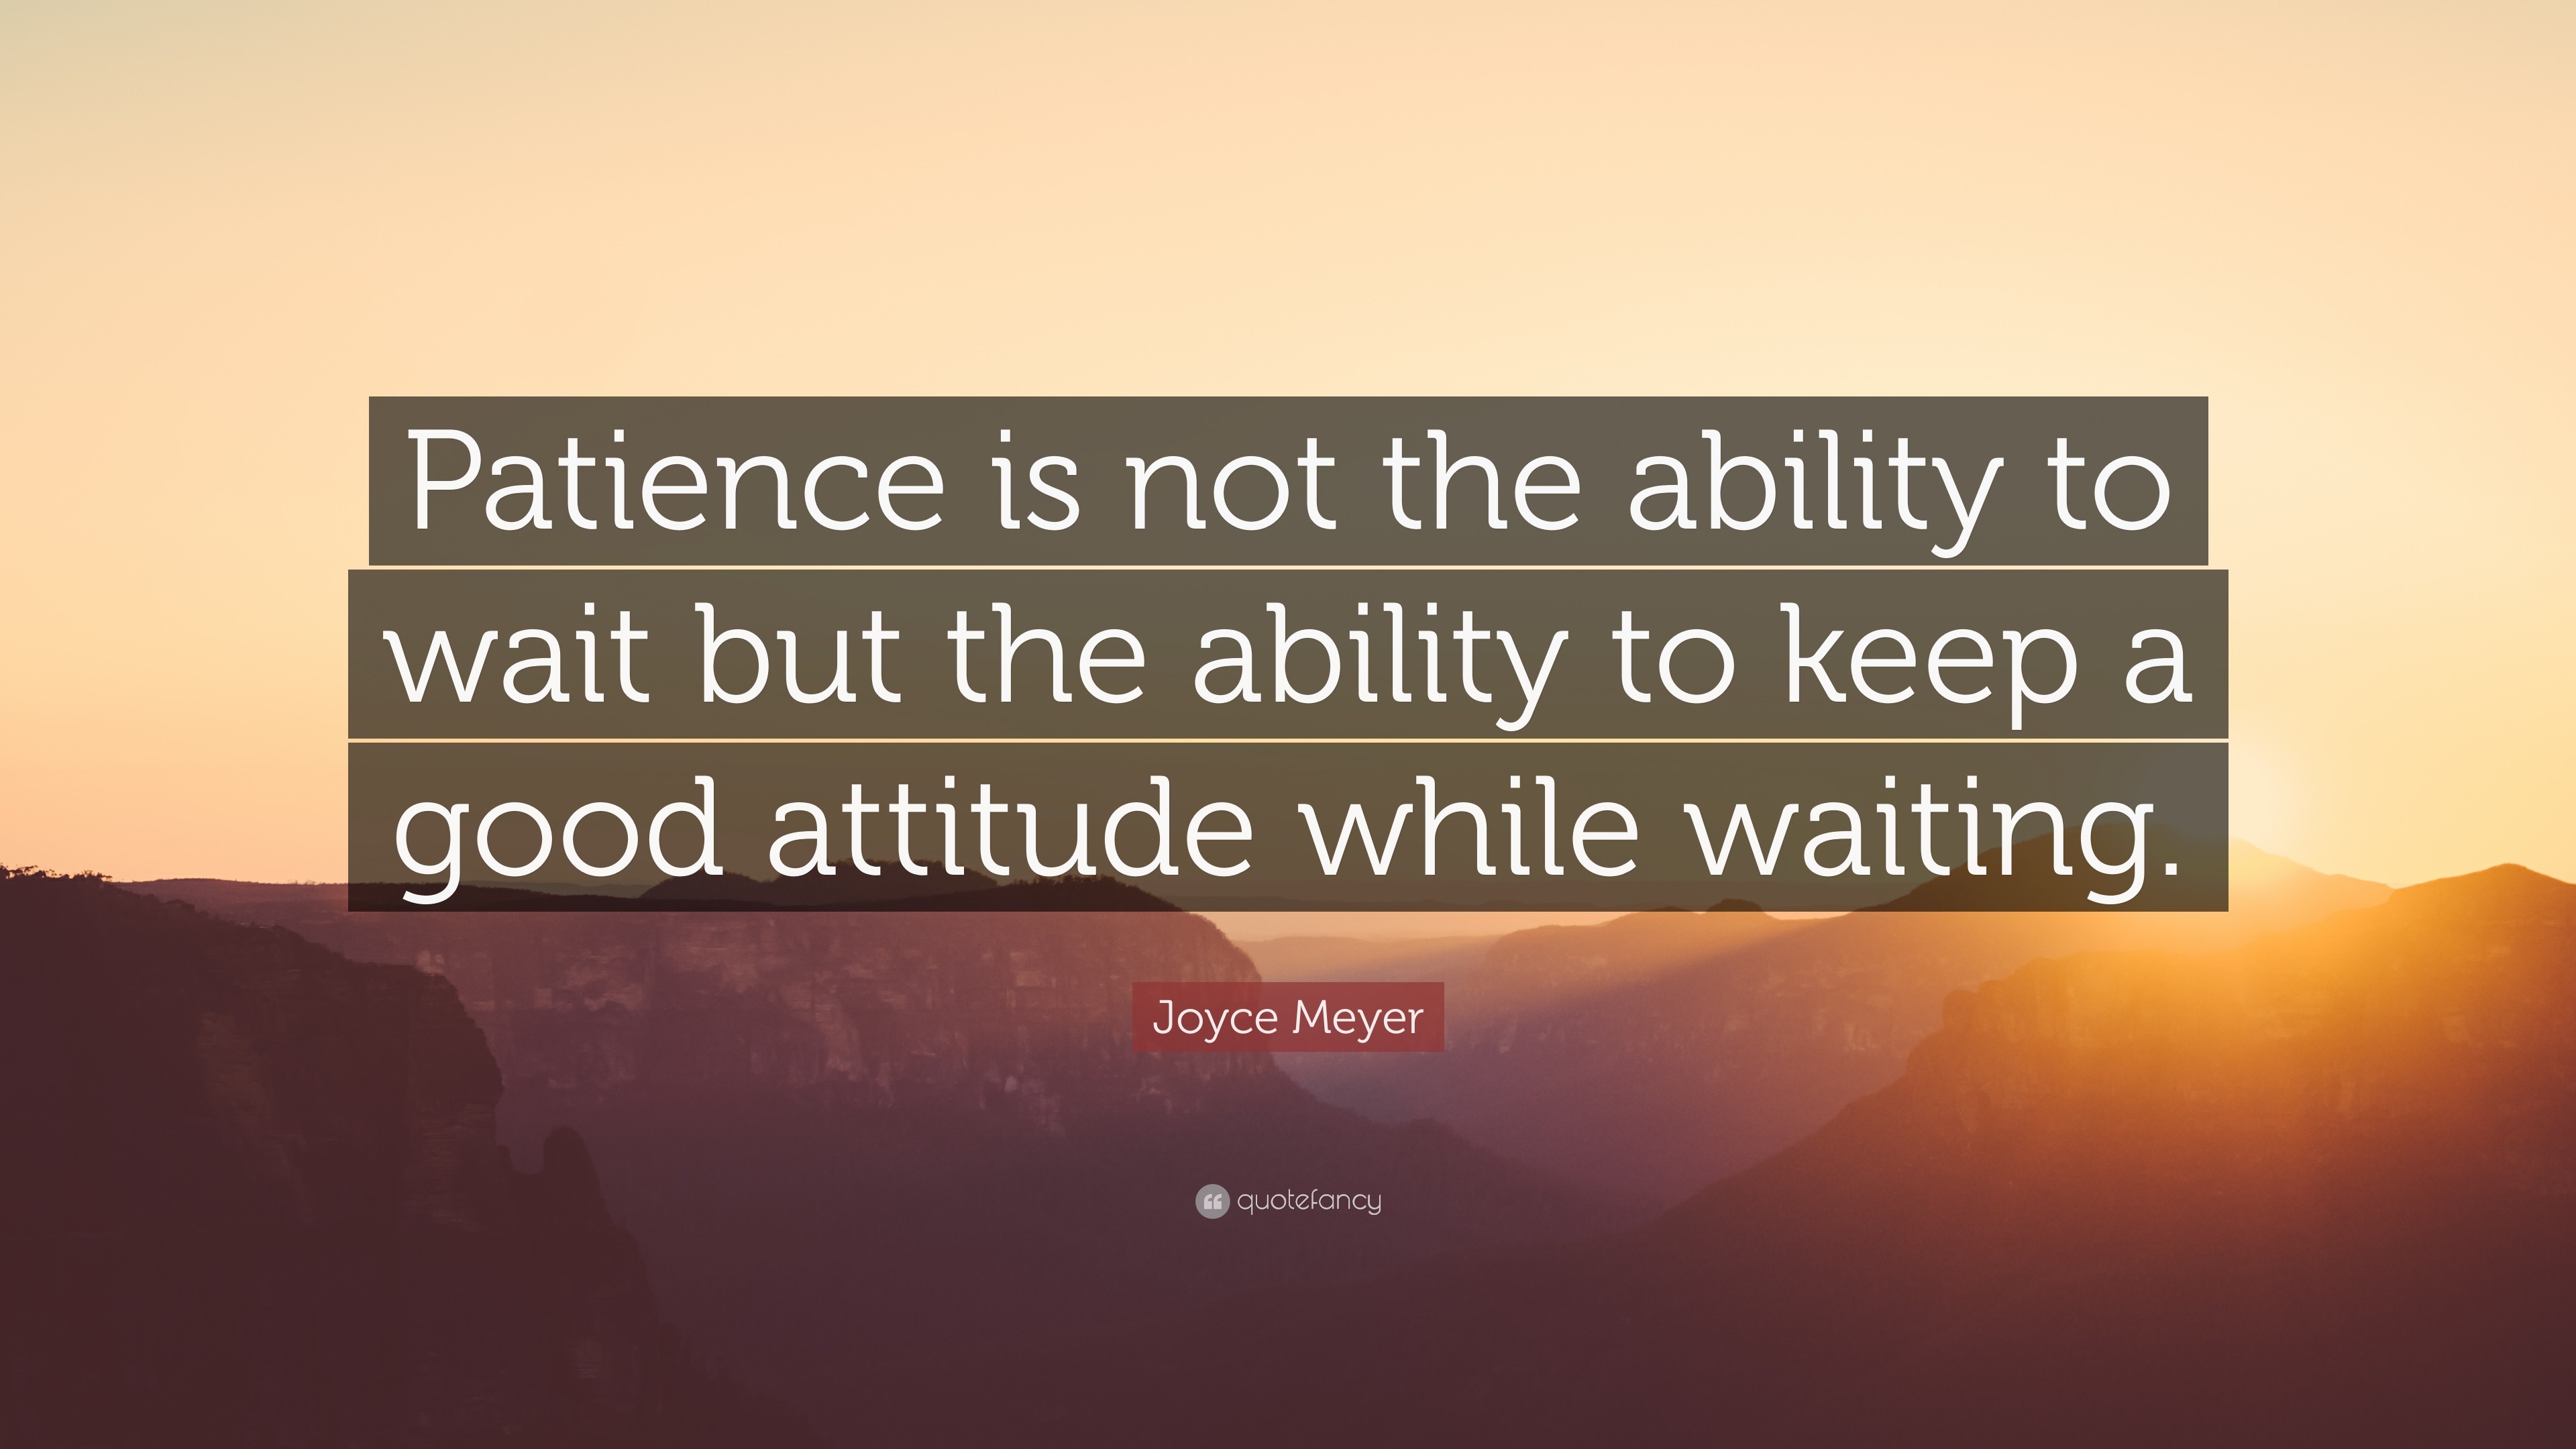 3840x2160 Patience Quotes: "Patience is not the ability to wait but th...